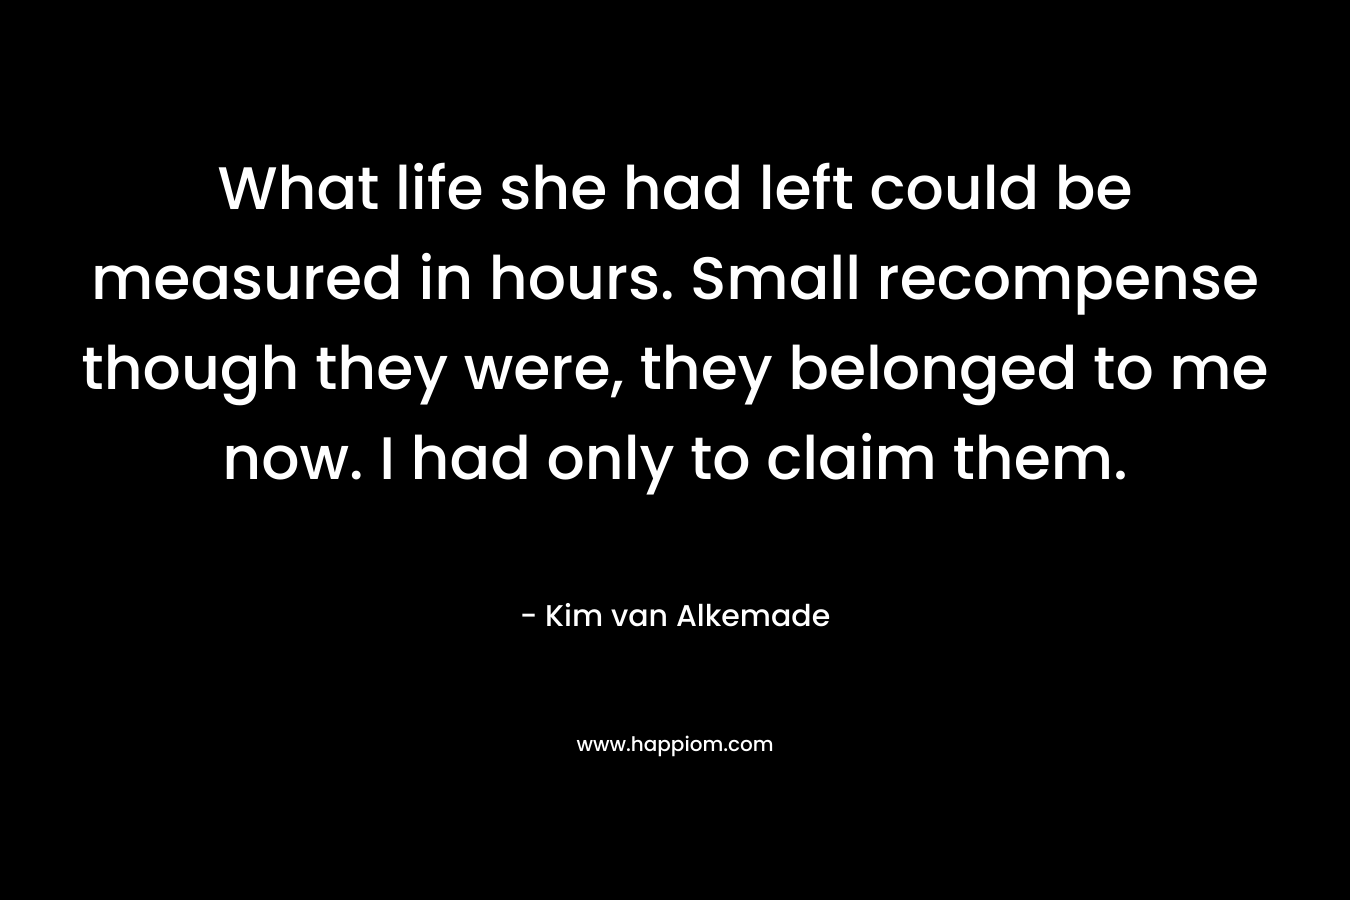 What life she had left could be measured in hours. Small recompense though they were, they belonged to me now. I had only to claim them. – Kim van Alkemade